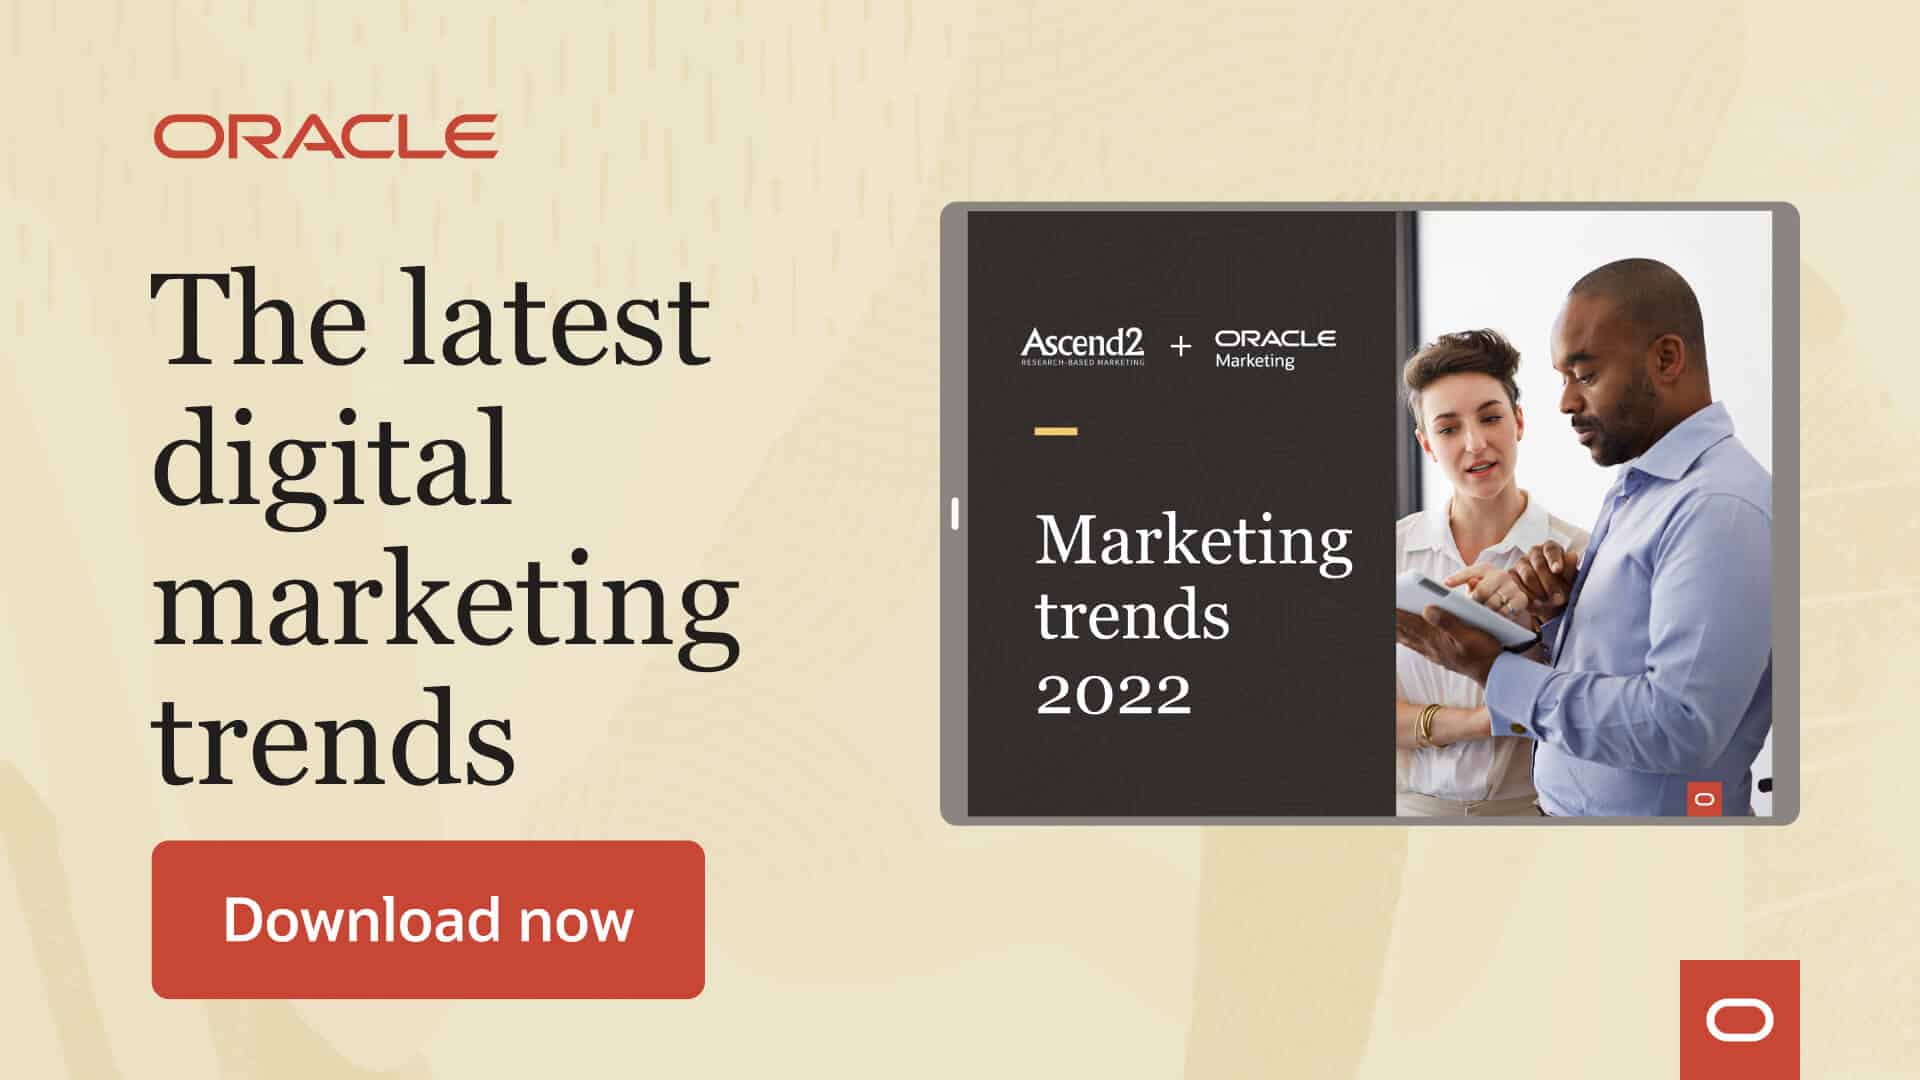 Latest digital marketing trends to better connect with customers